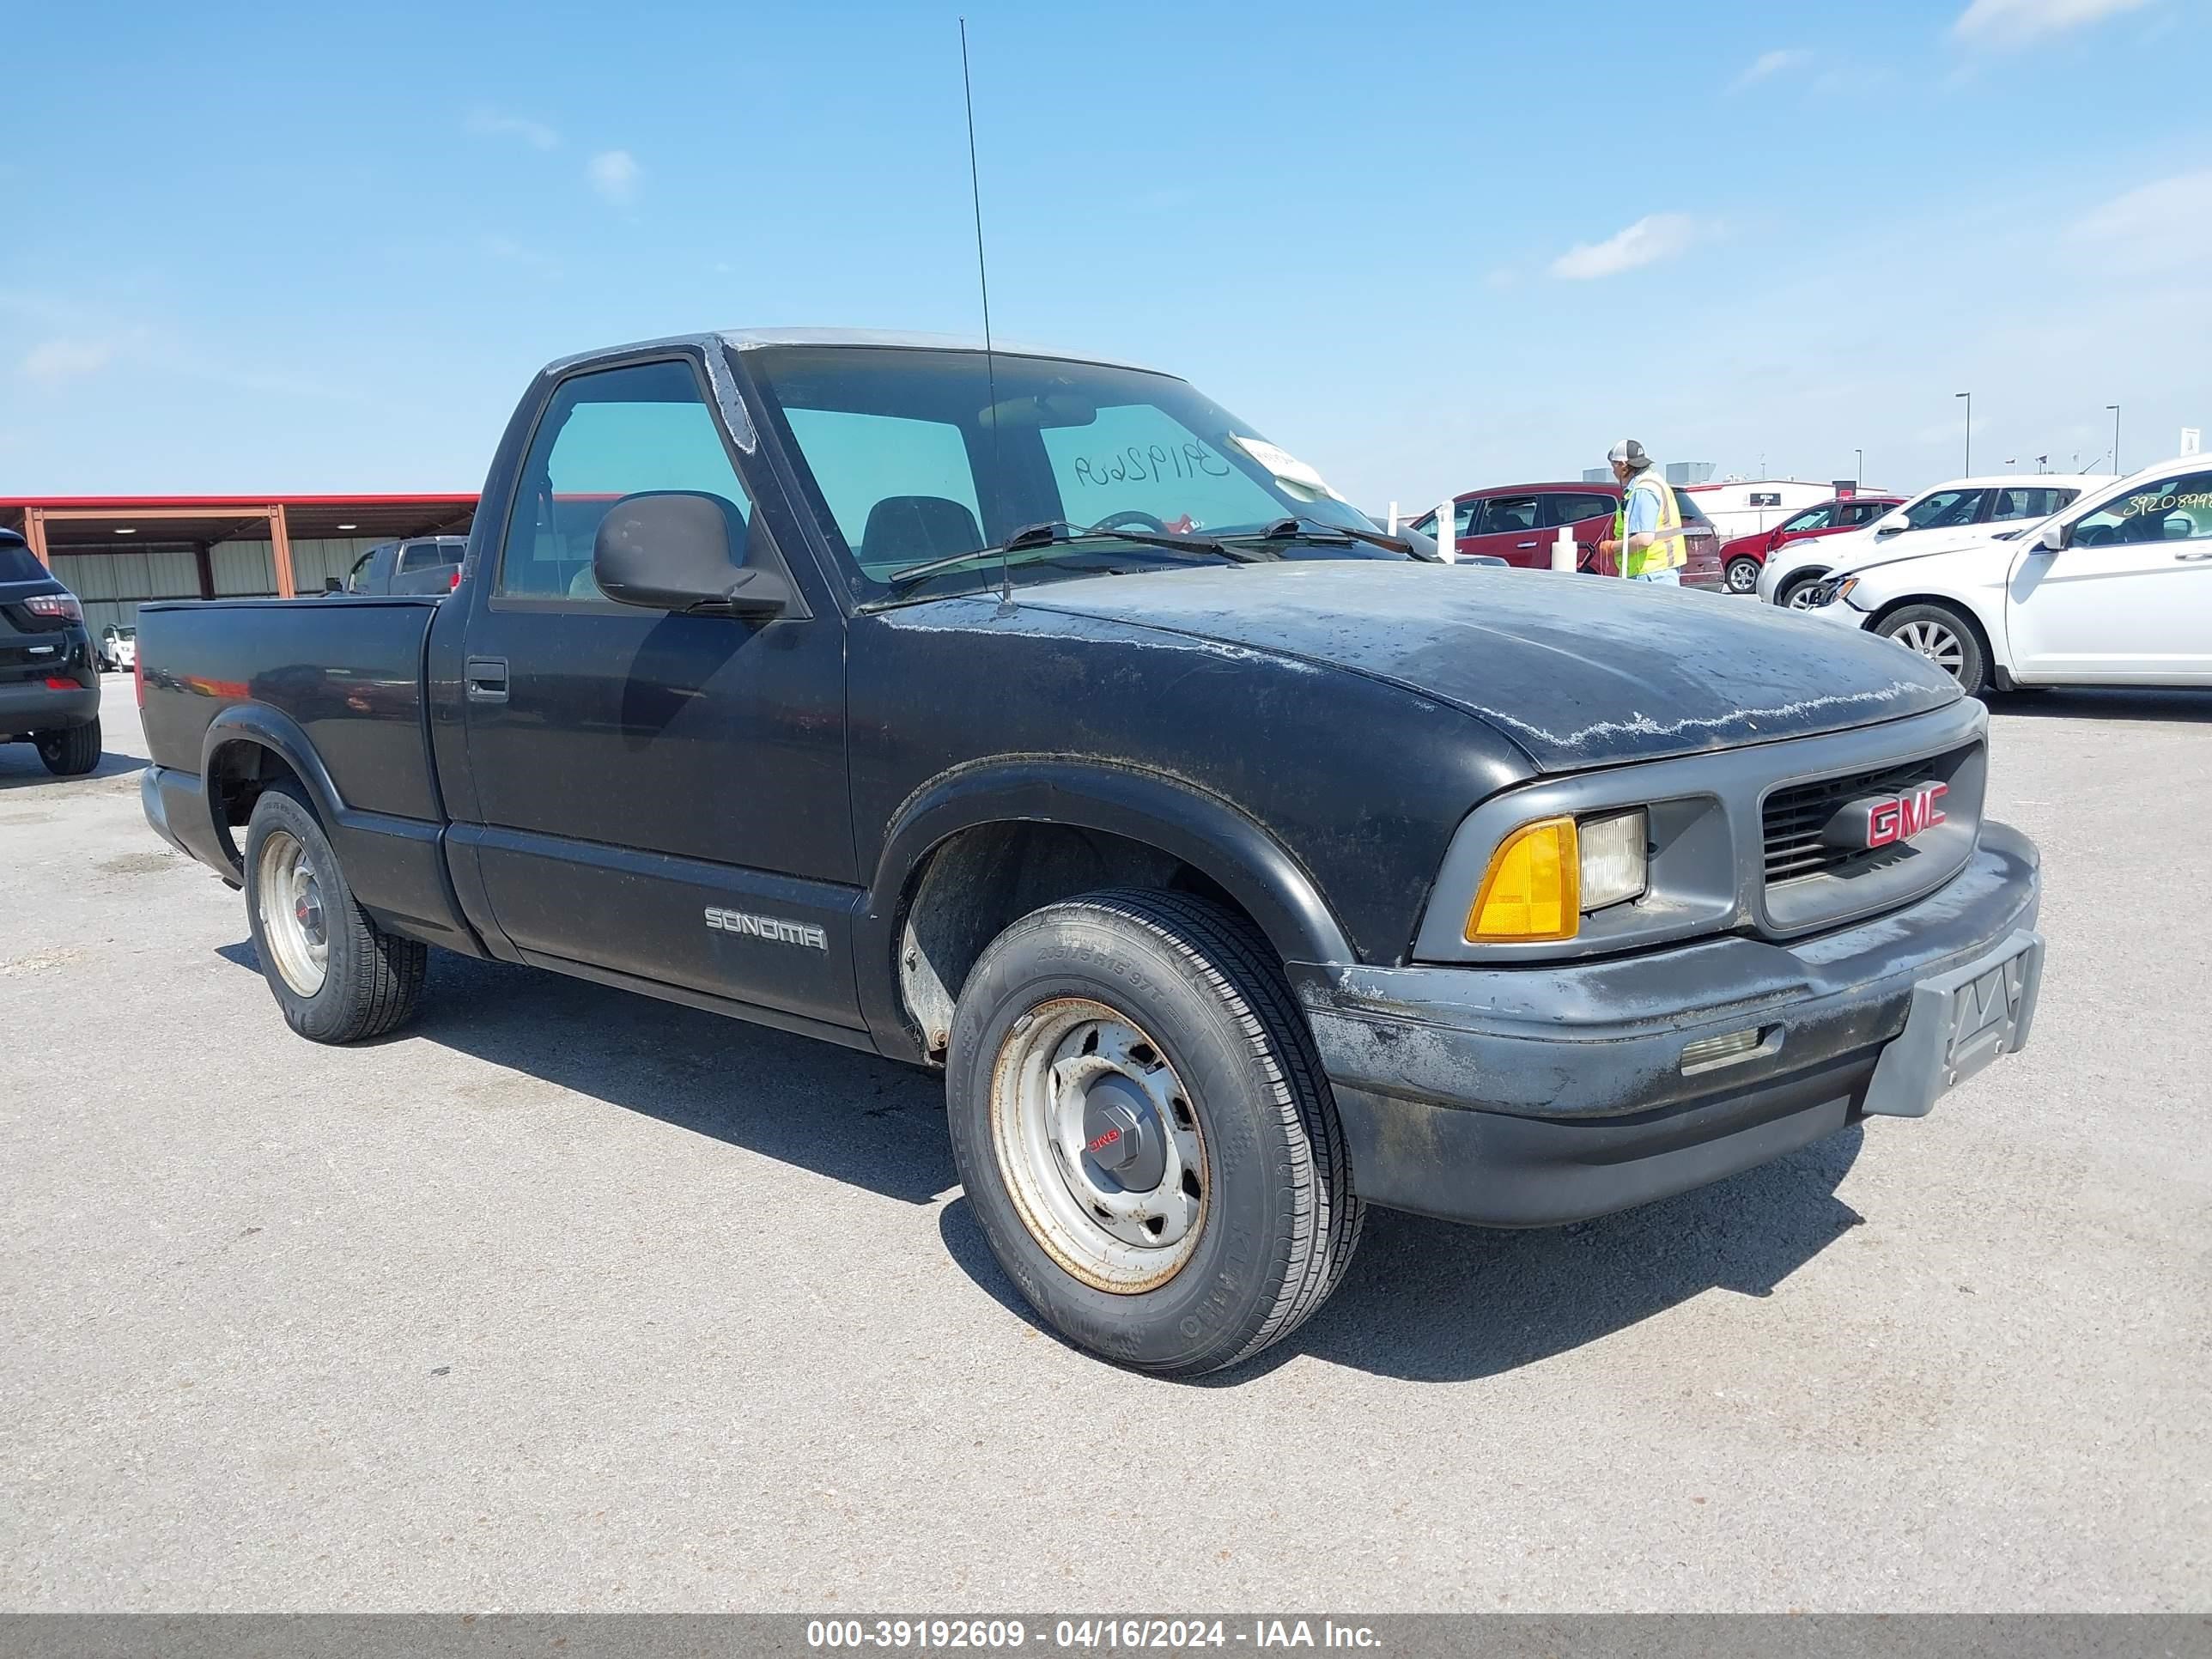 vin: 1GTCS1440S8501601 1GTCS1440S8501601 1995 gmc sonoma 2200 for Sale in 62232, 2436 Old Country Inn Dr, Caseyville, Illinois, USA